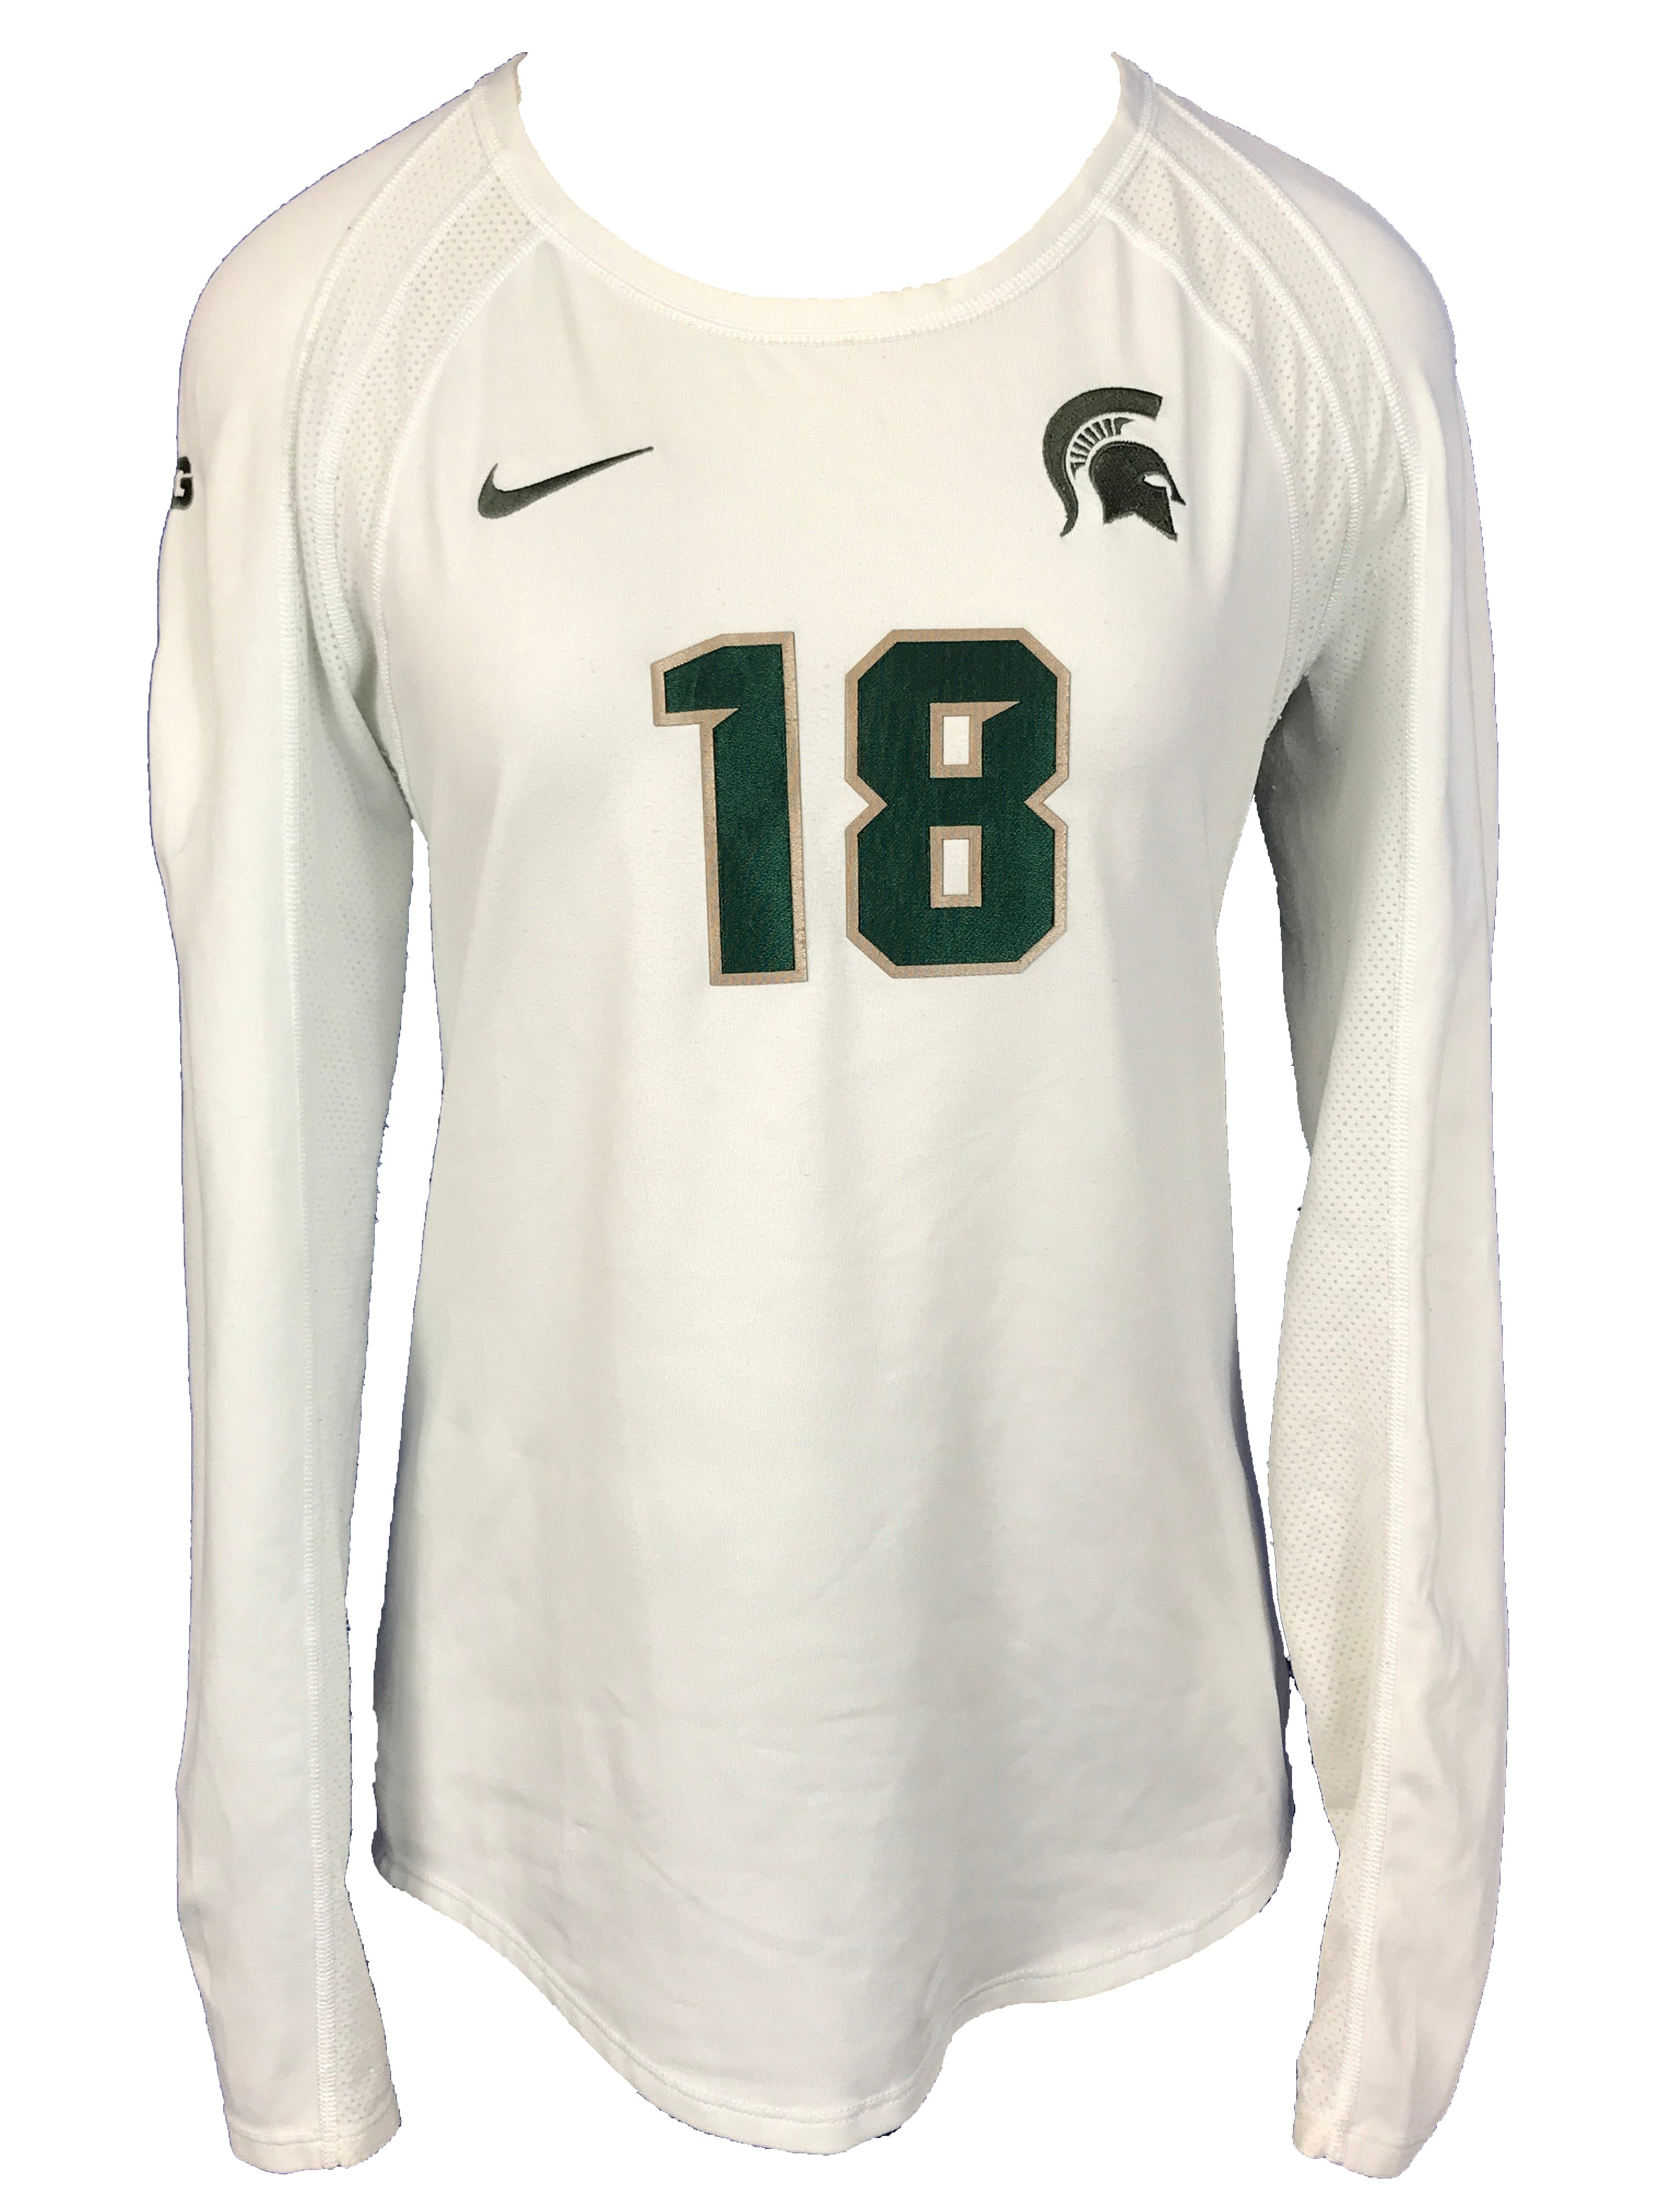 Nike White Long Sleeve Volleyball Jersey #18 Women's Size L